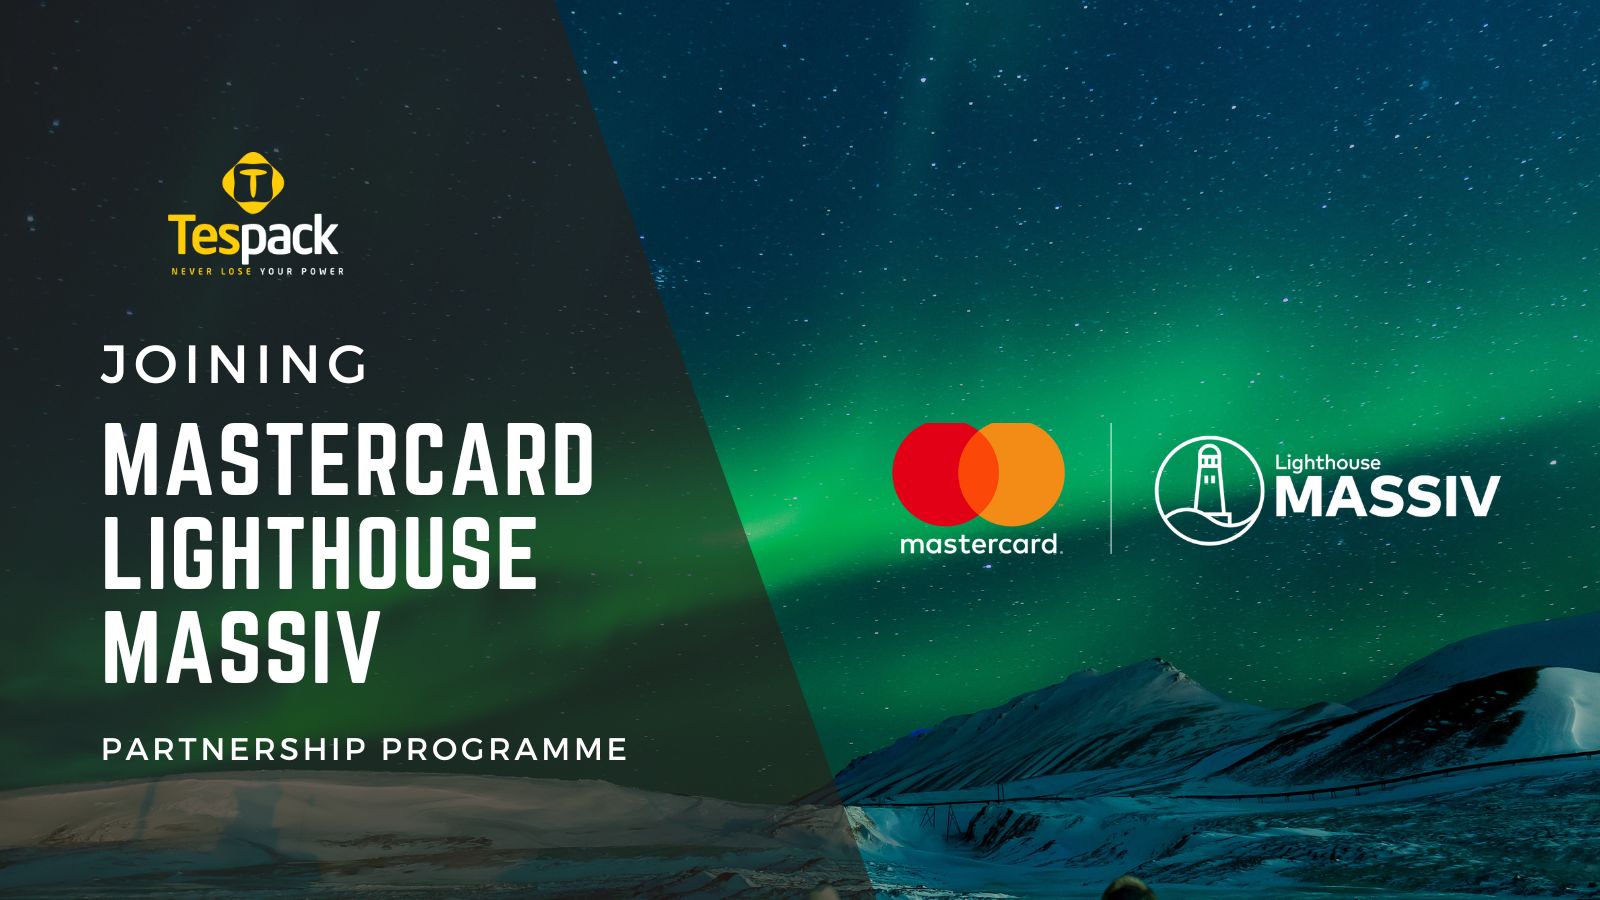 Selected to join Mastercard Lighthouse Massiv Partnership Programme